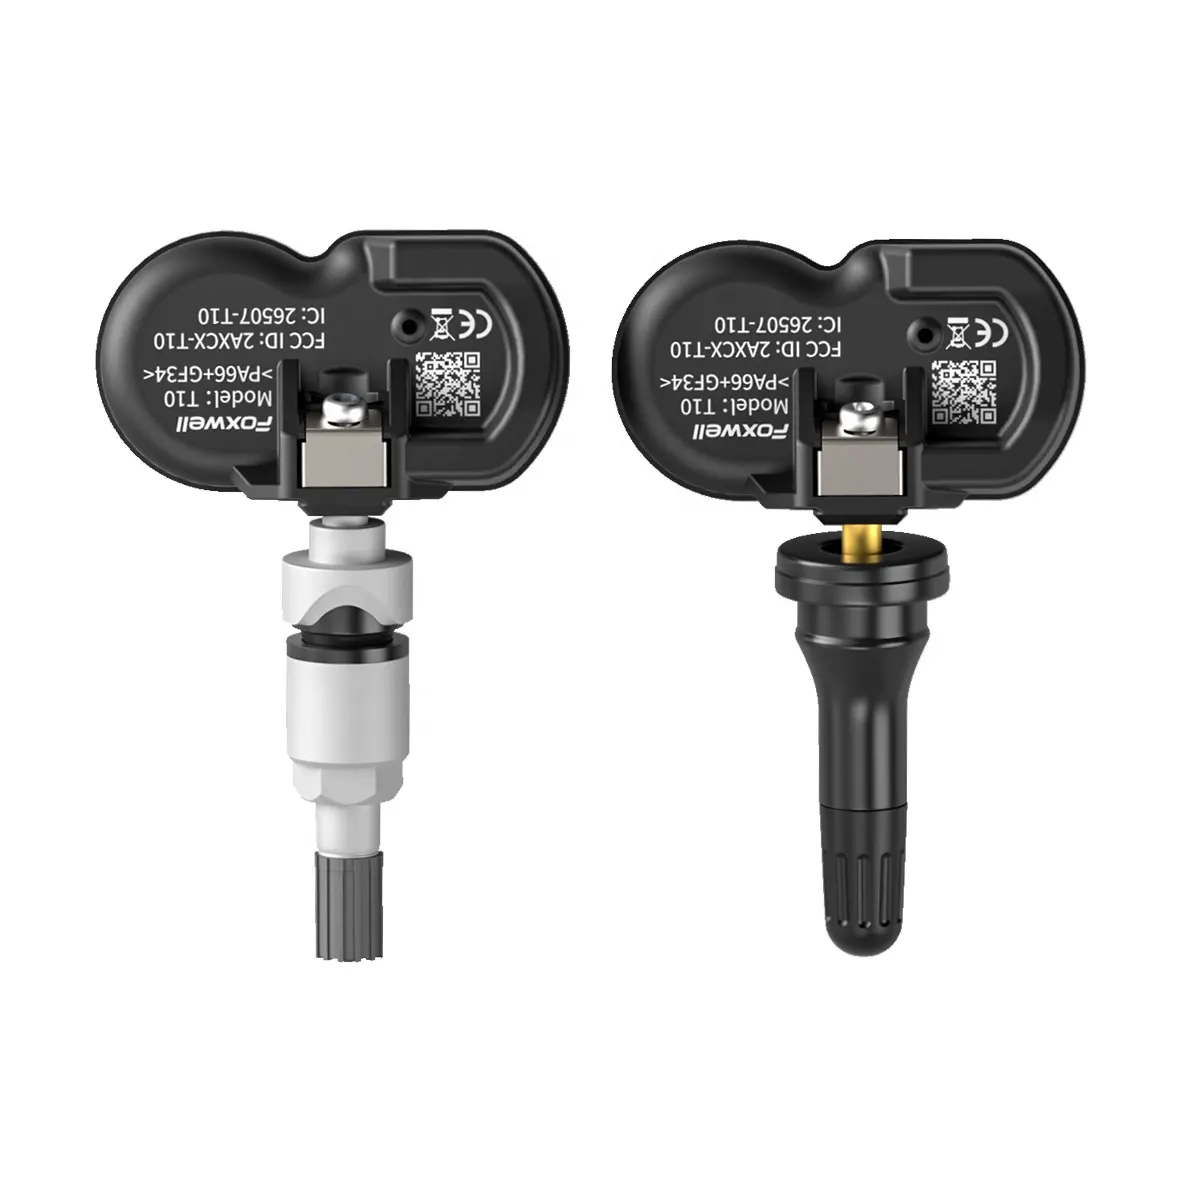 Programmable TPMS Tire Pressure Sensors 315Mhz 433Mhz Same as Autel MX-Sensors works for All Cars